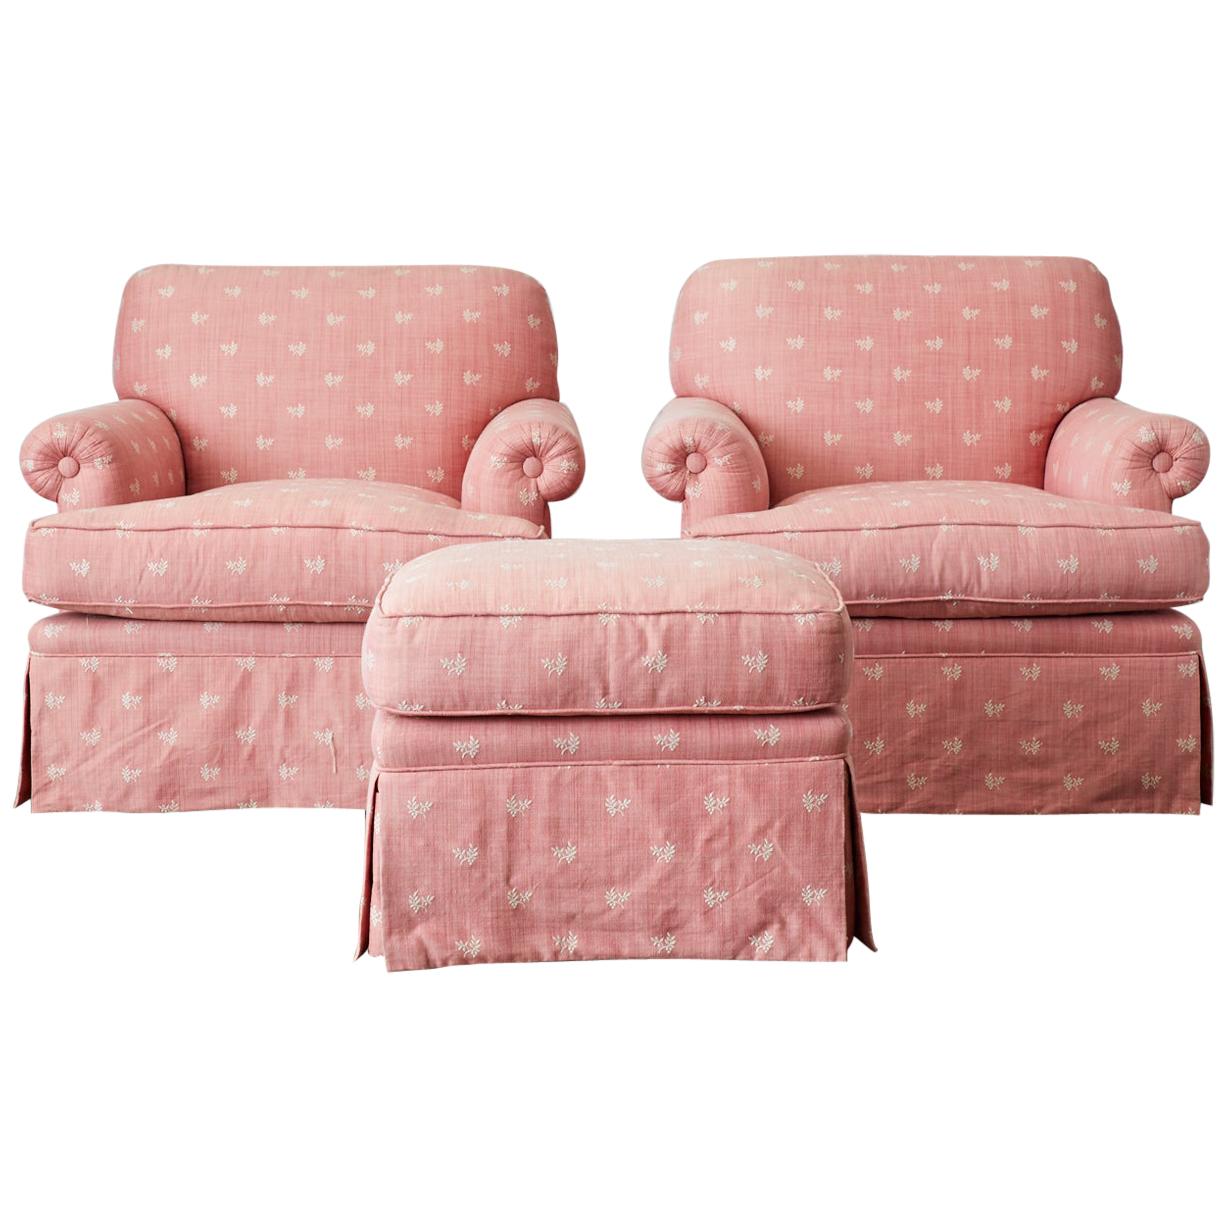 Pair of English Style Upholstered Club Chairs with Ottoman